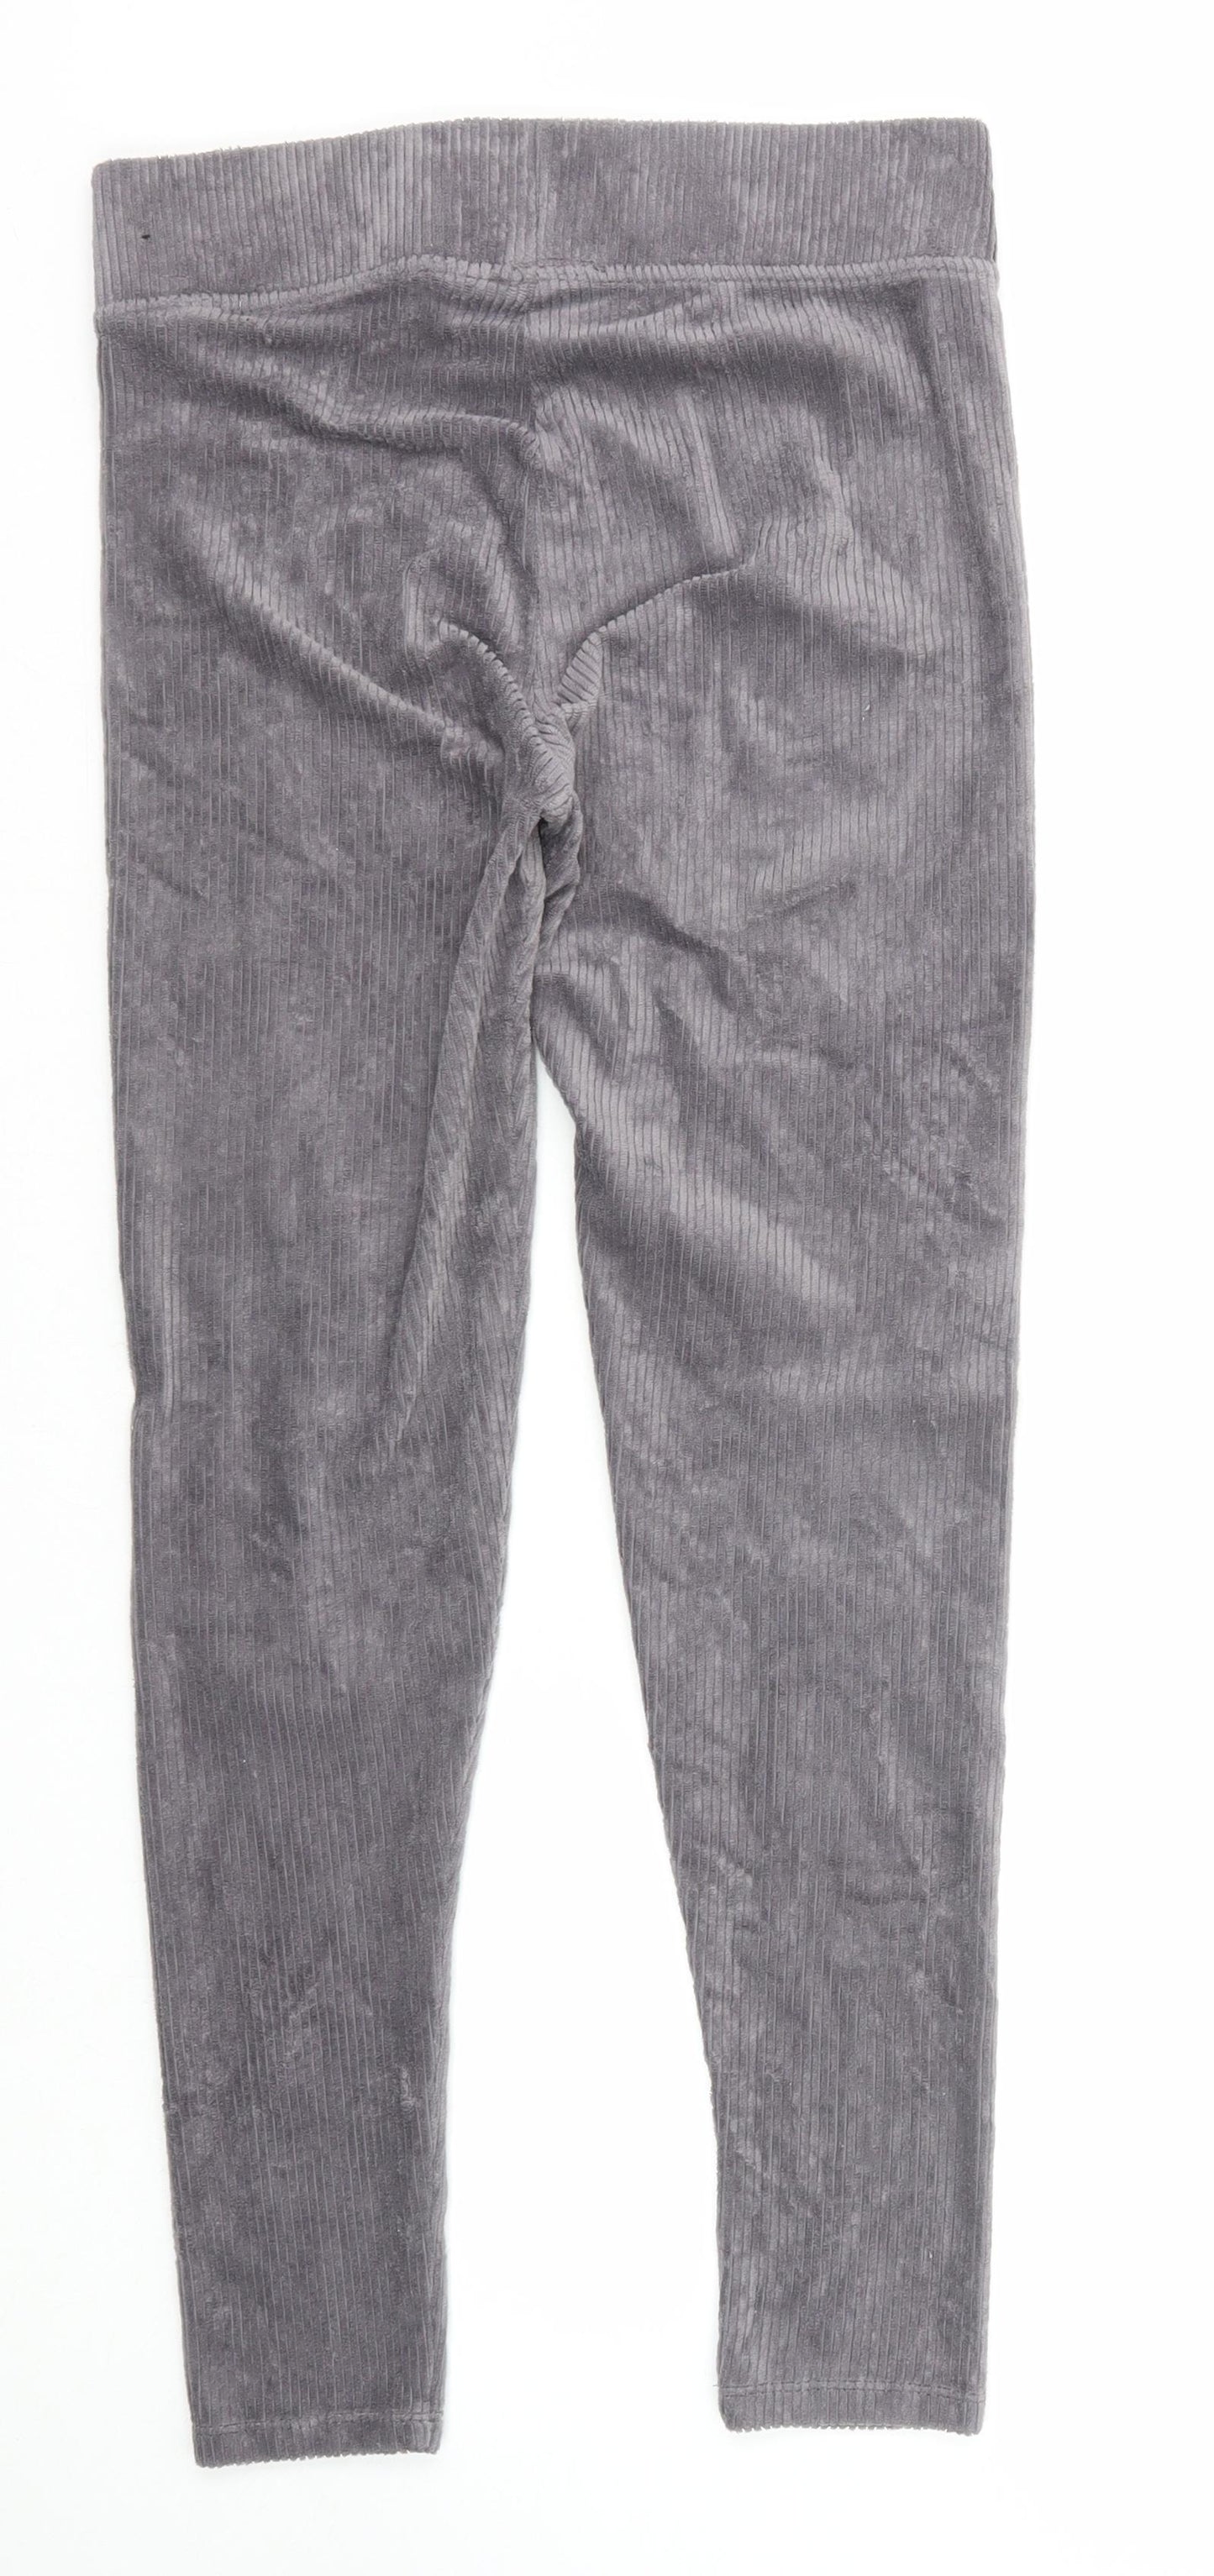 Marks and Spencer Womens Grey Cotton Trousers Size 10 Regular